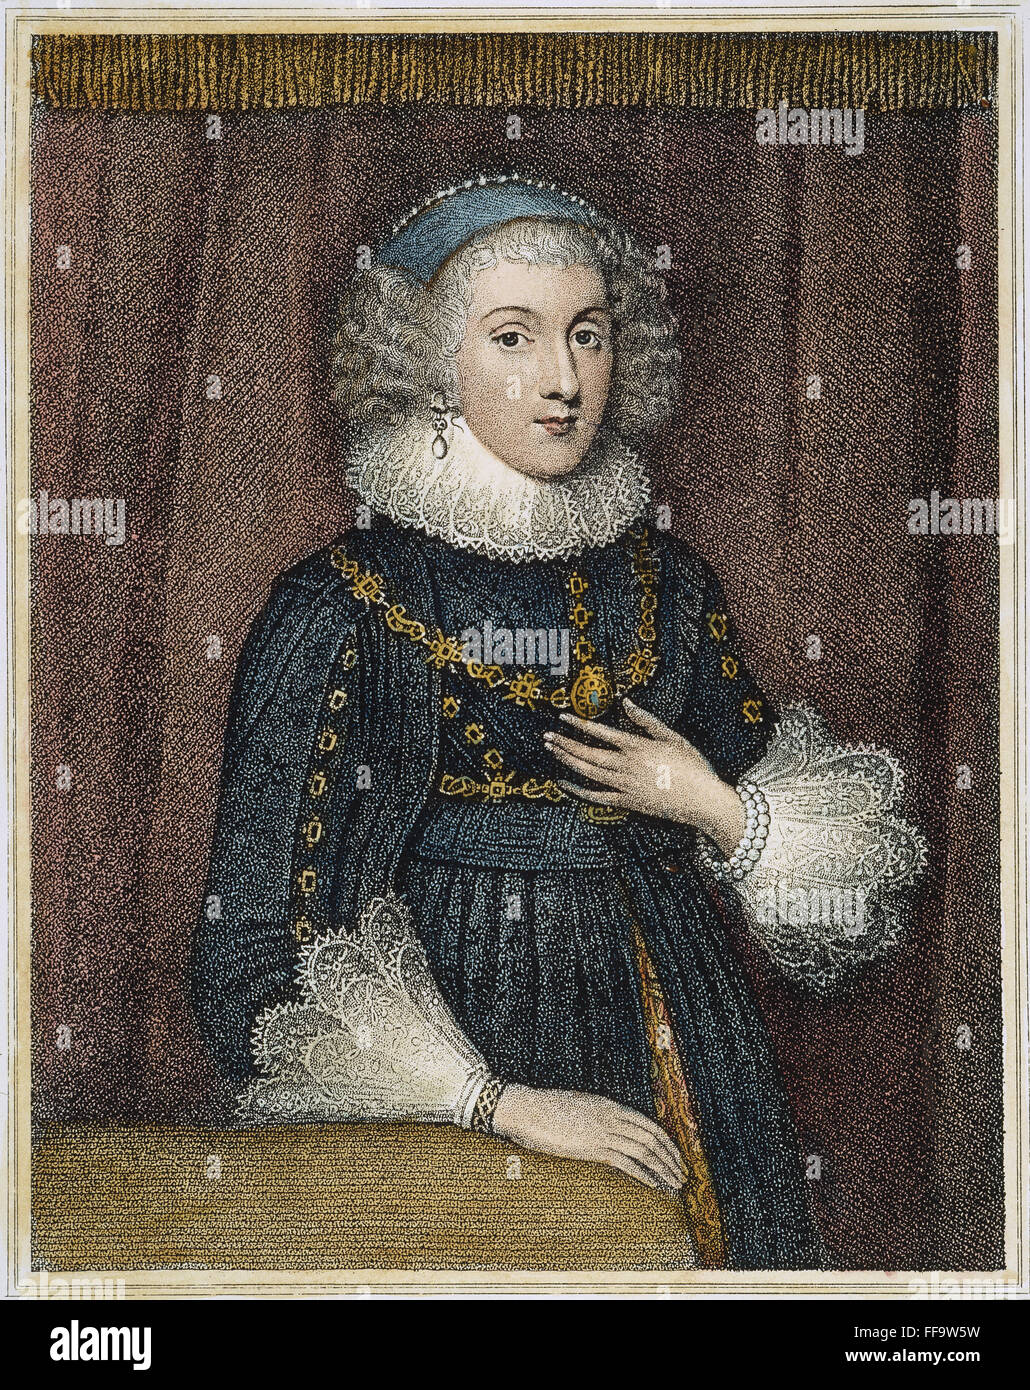 MARY HERBERT (1561-1621). /nCountess of Pembroke. Line and stipple engraving, English, 1836. Stock Photo